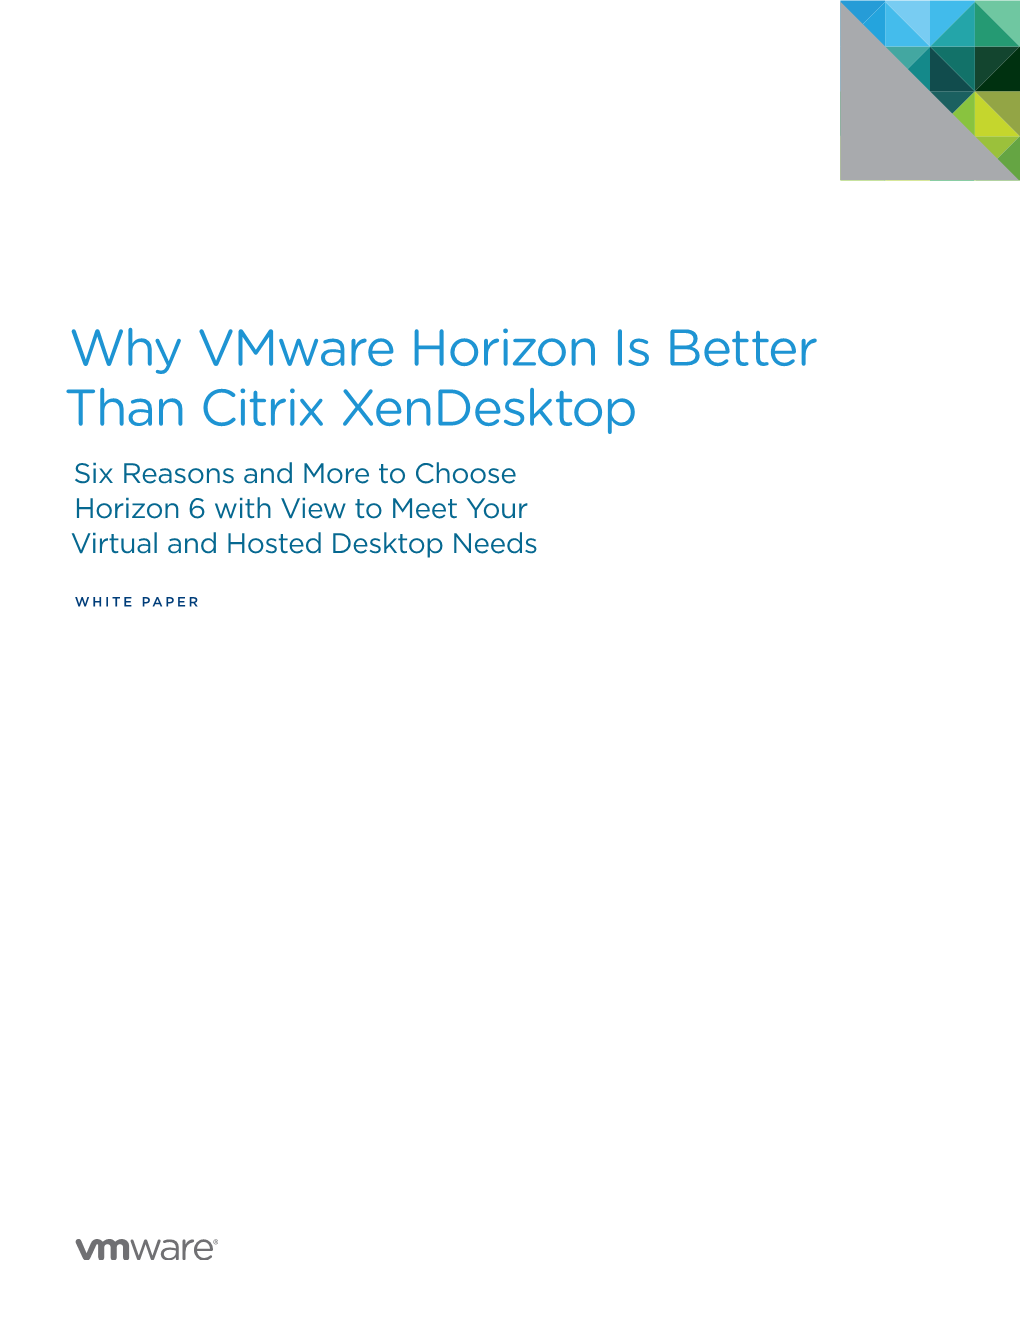 Why Vmware Horizon Is Better Than Citrix Xendesktop Six Reasons and More to Choose Horizon 6 with View to Meet Your Virtual and Hosted Desktop Needs